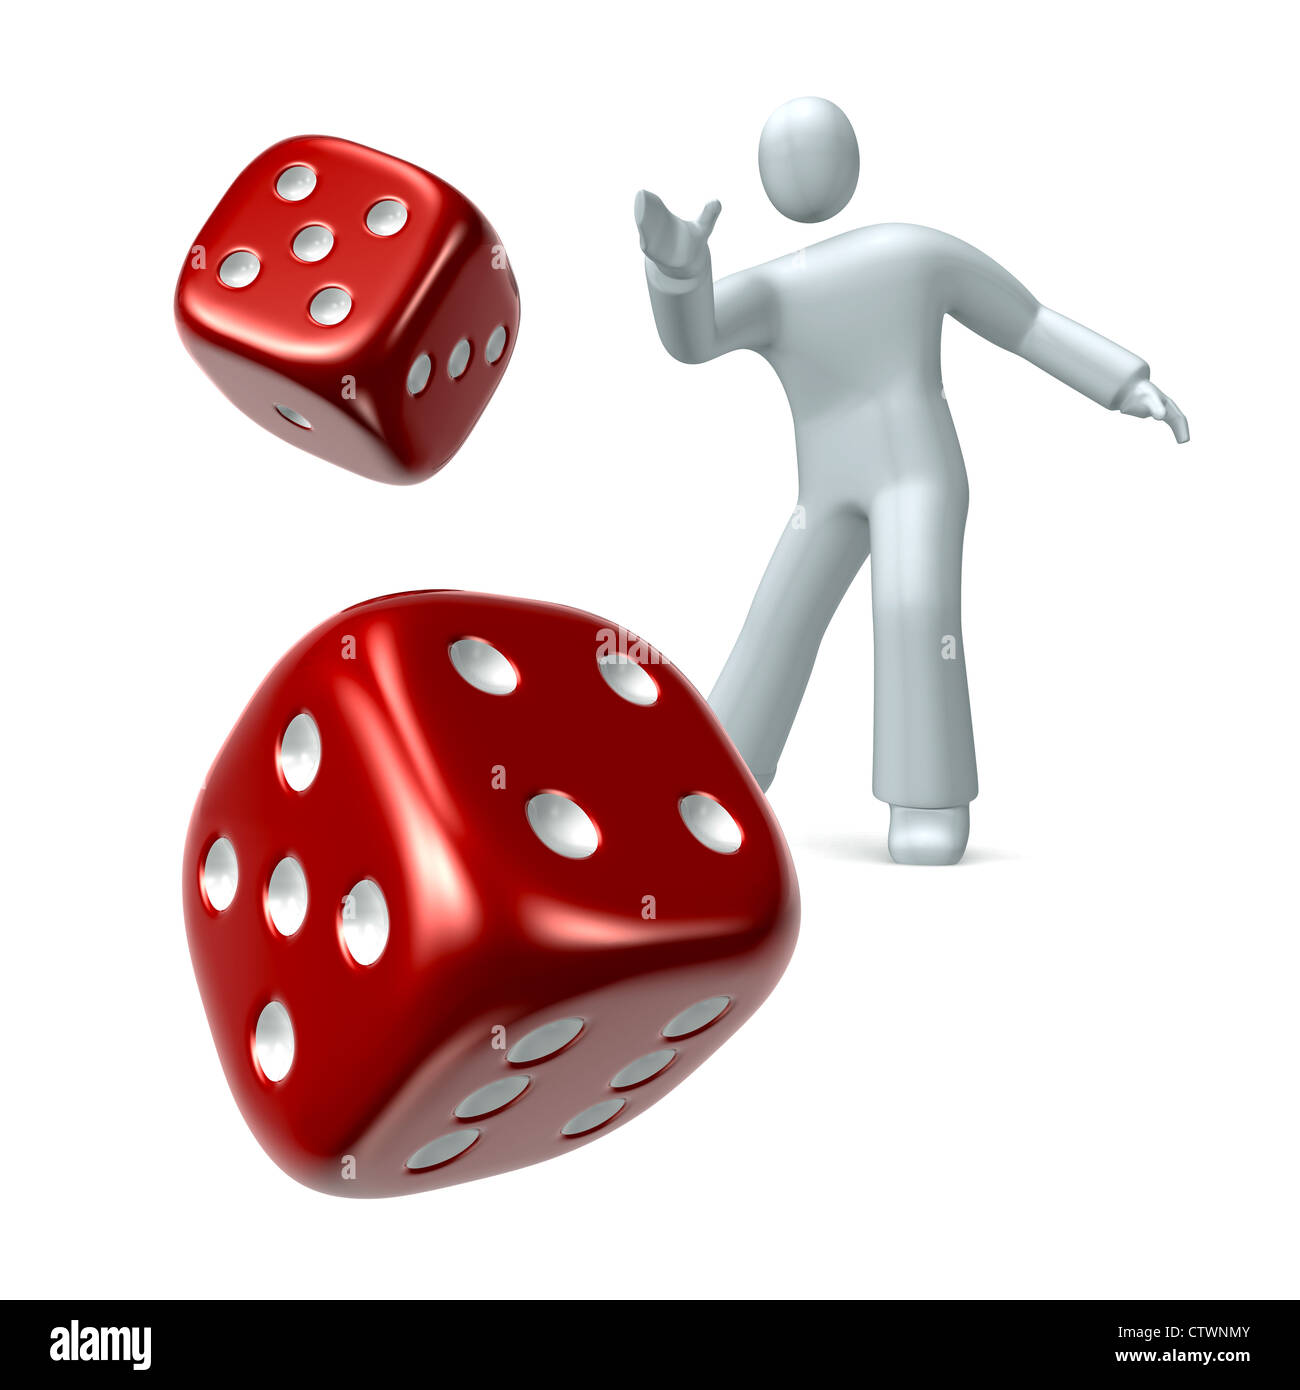 Throw the Dice - pair of red dice Stock Photo